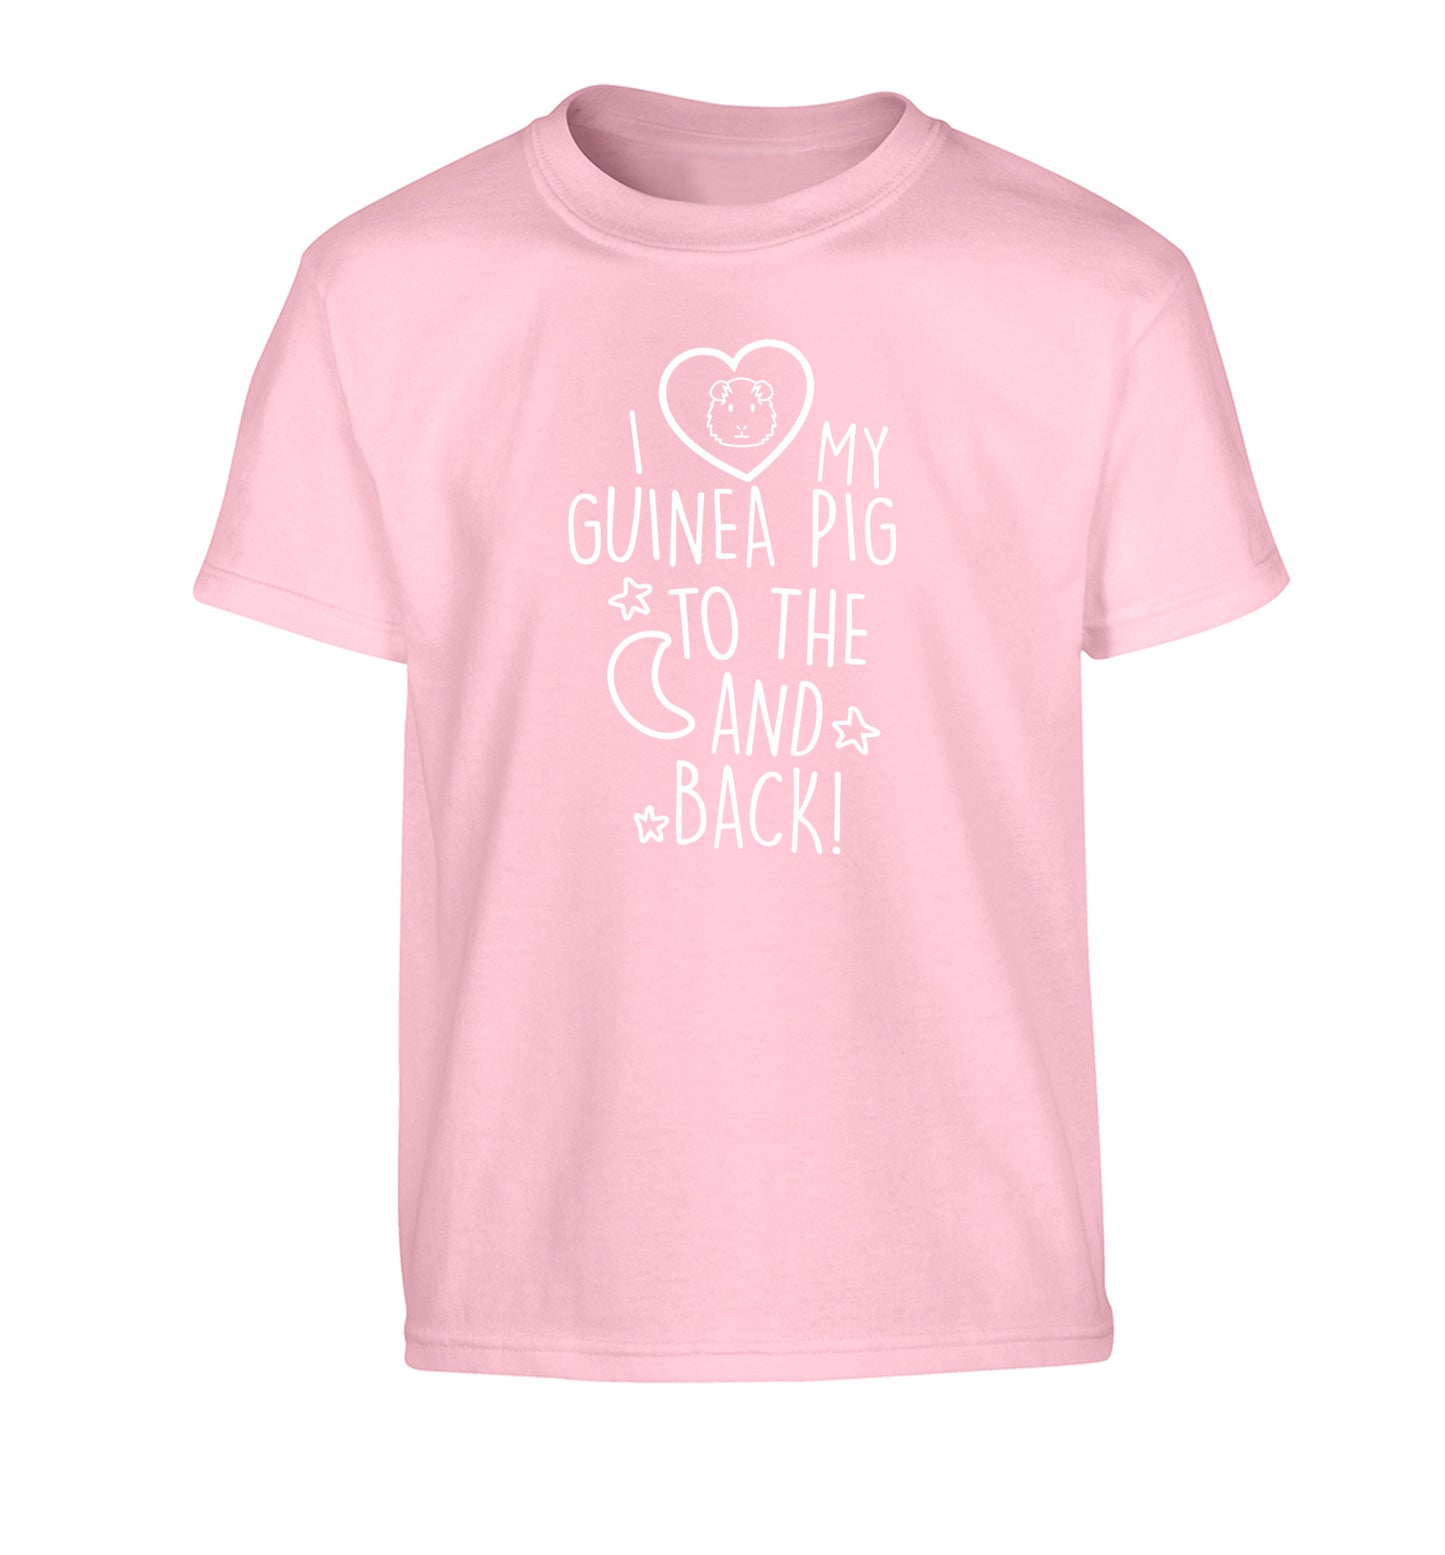 I love my guinea pig to the moon and back Children's light pink Tshirt 12-14 Years